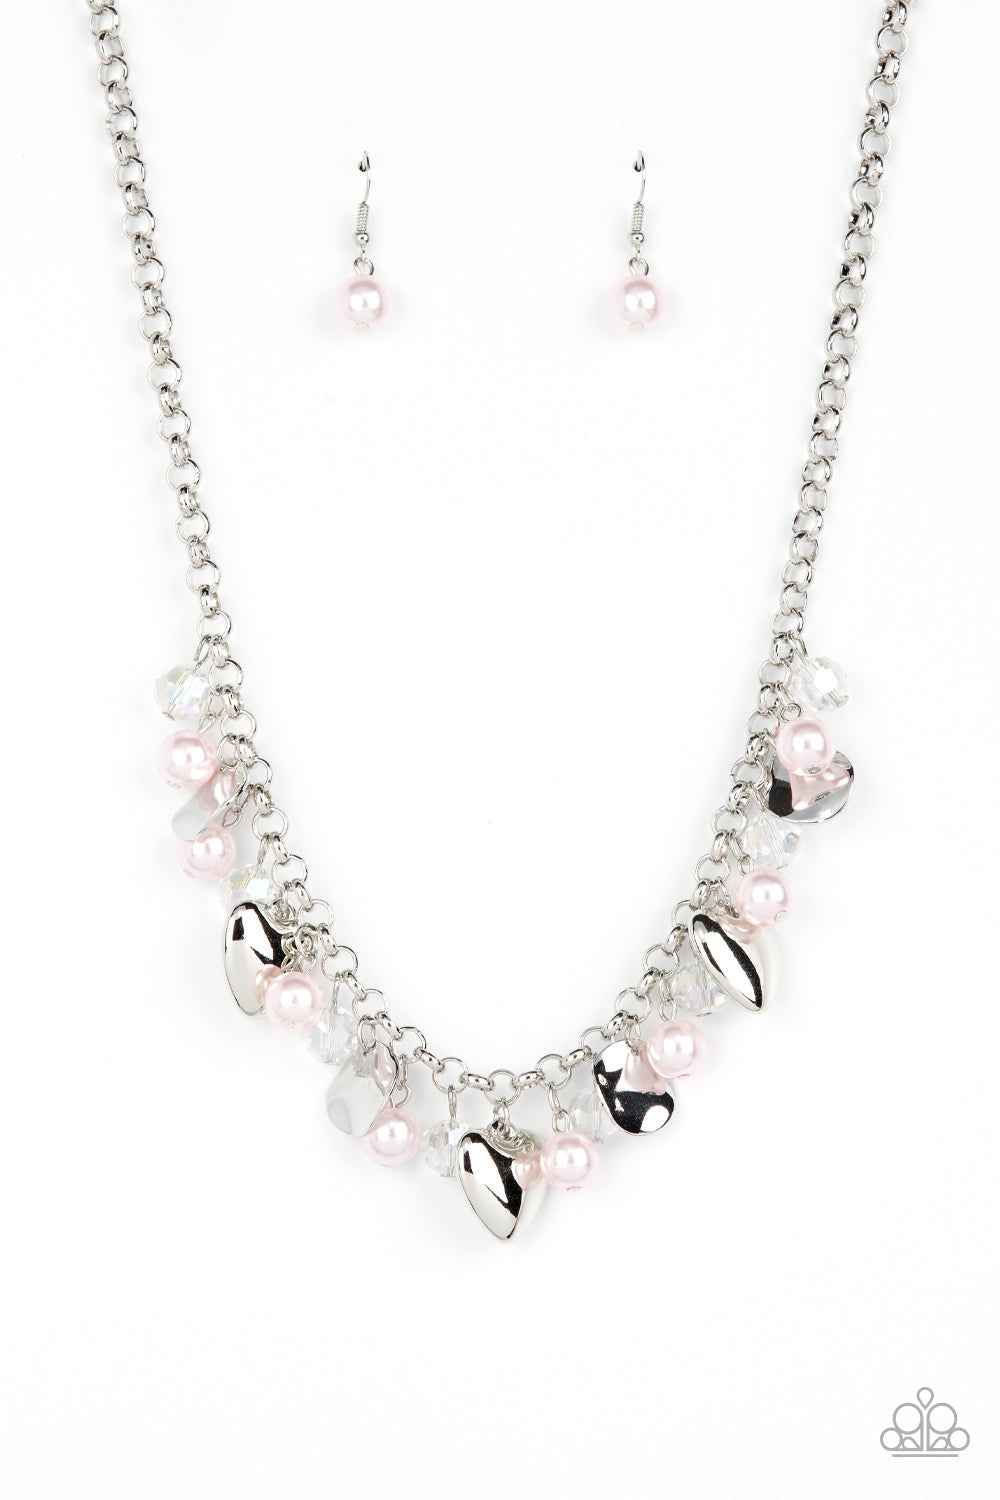 True Loves Trove - Pink Pearl and Silver Fringe Necklace - Paparazzi Accessories - Pink pearls, glassy white crystal-like beads, crinkled silver discs, and oversized locket inspired silver heart frames dance from a shiny silver chain, resulting in a romantic fringe below the collar stylish fashion necklace.